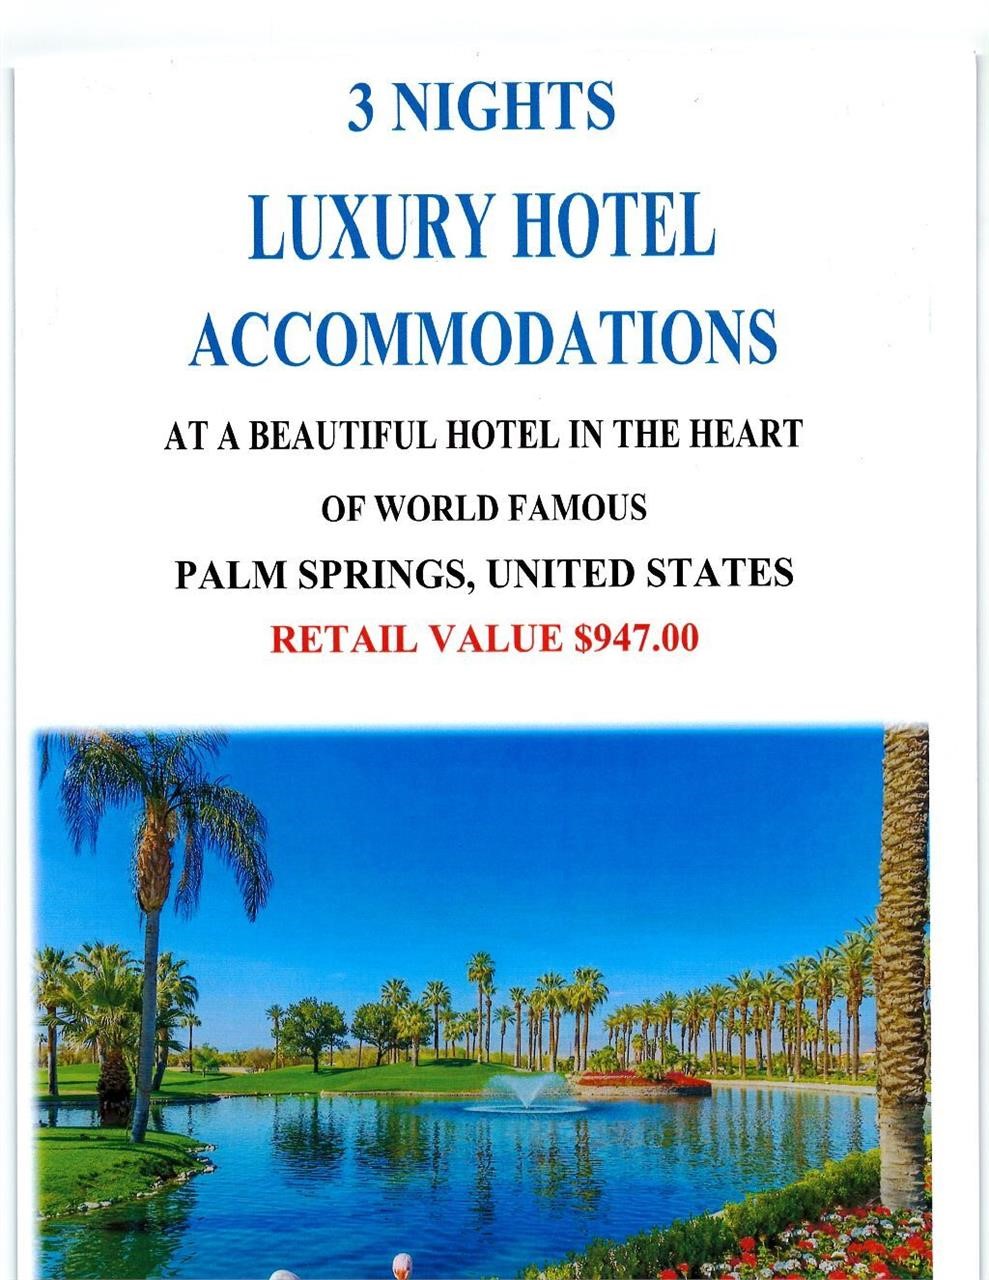 April 11TH. Vacation Hotel Accommodation Packages Auction